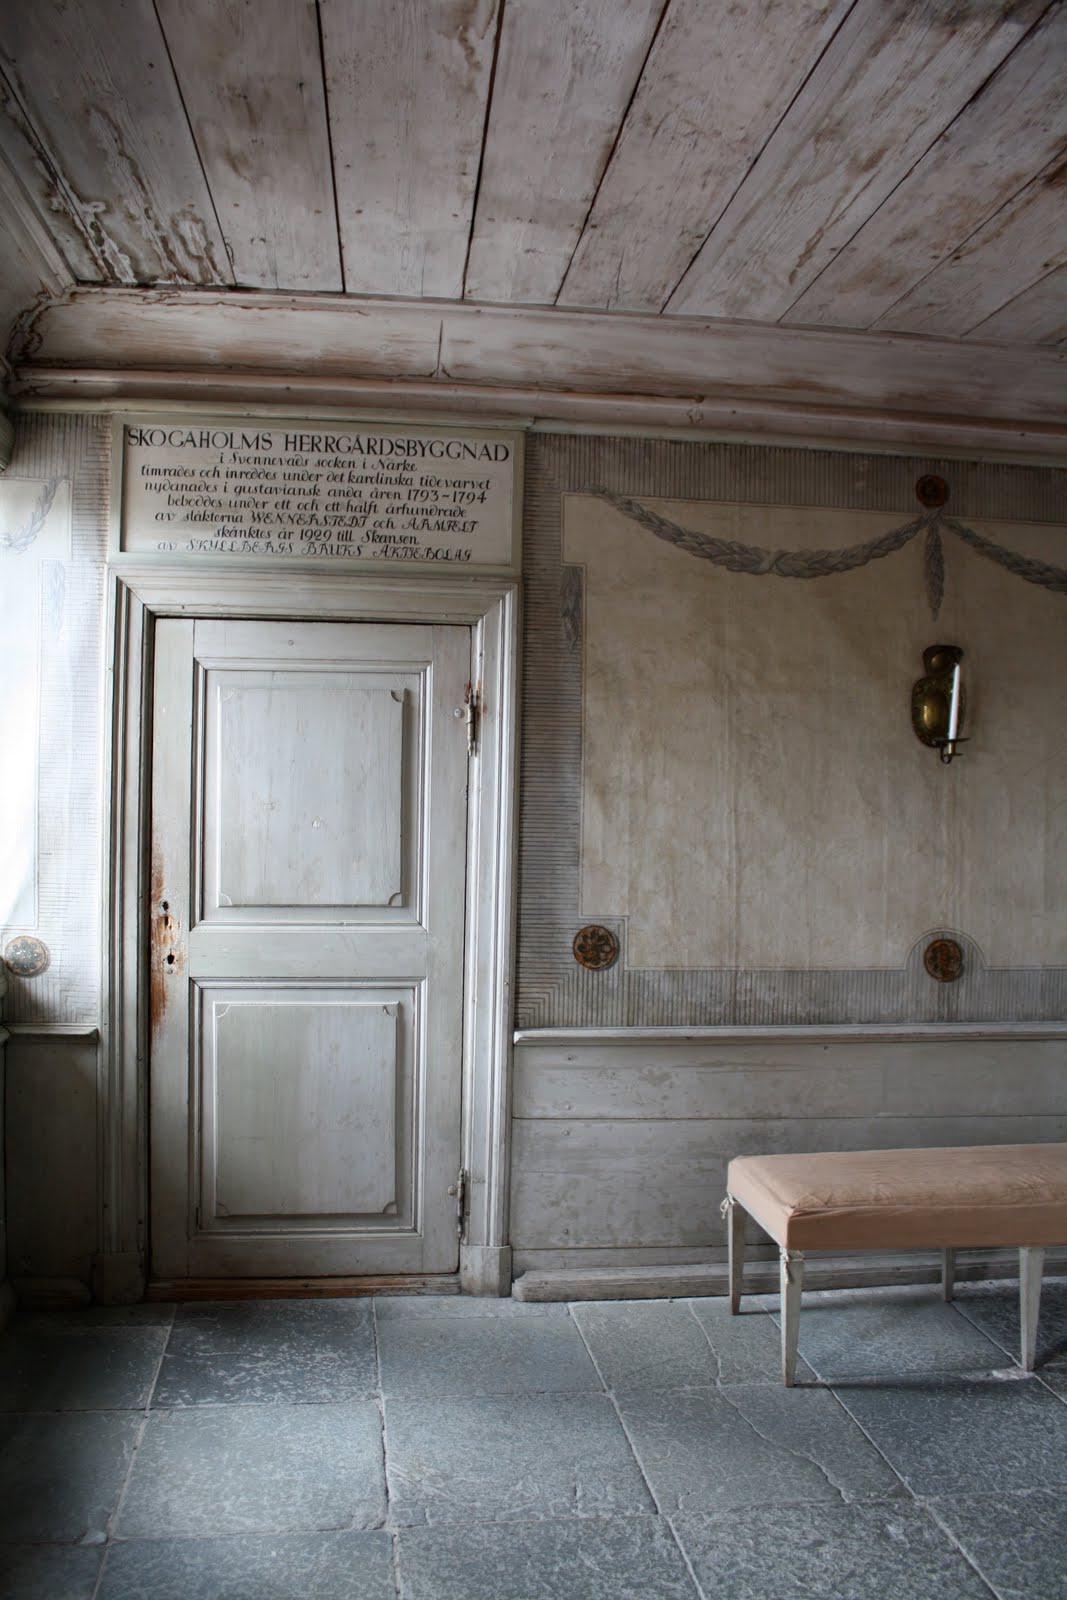 feast of historical interiors are on display at the Skansen open air ...